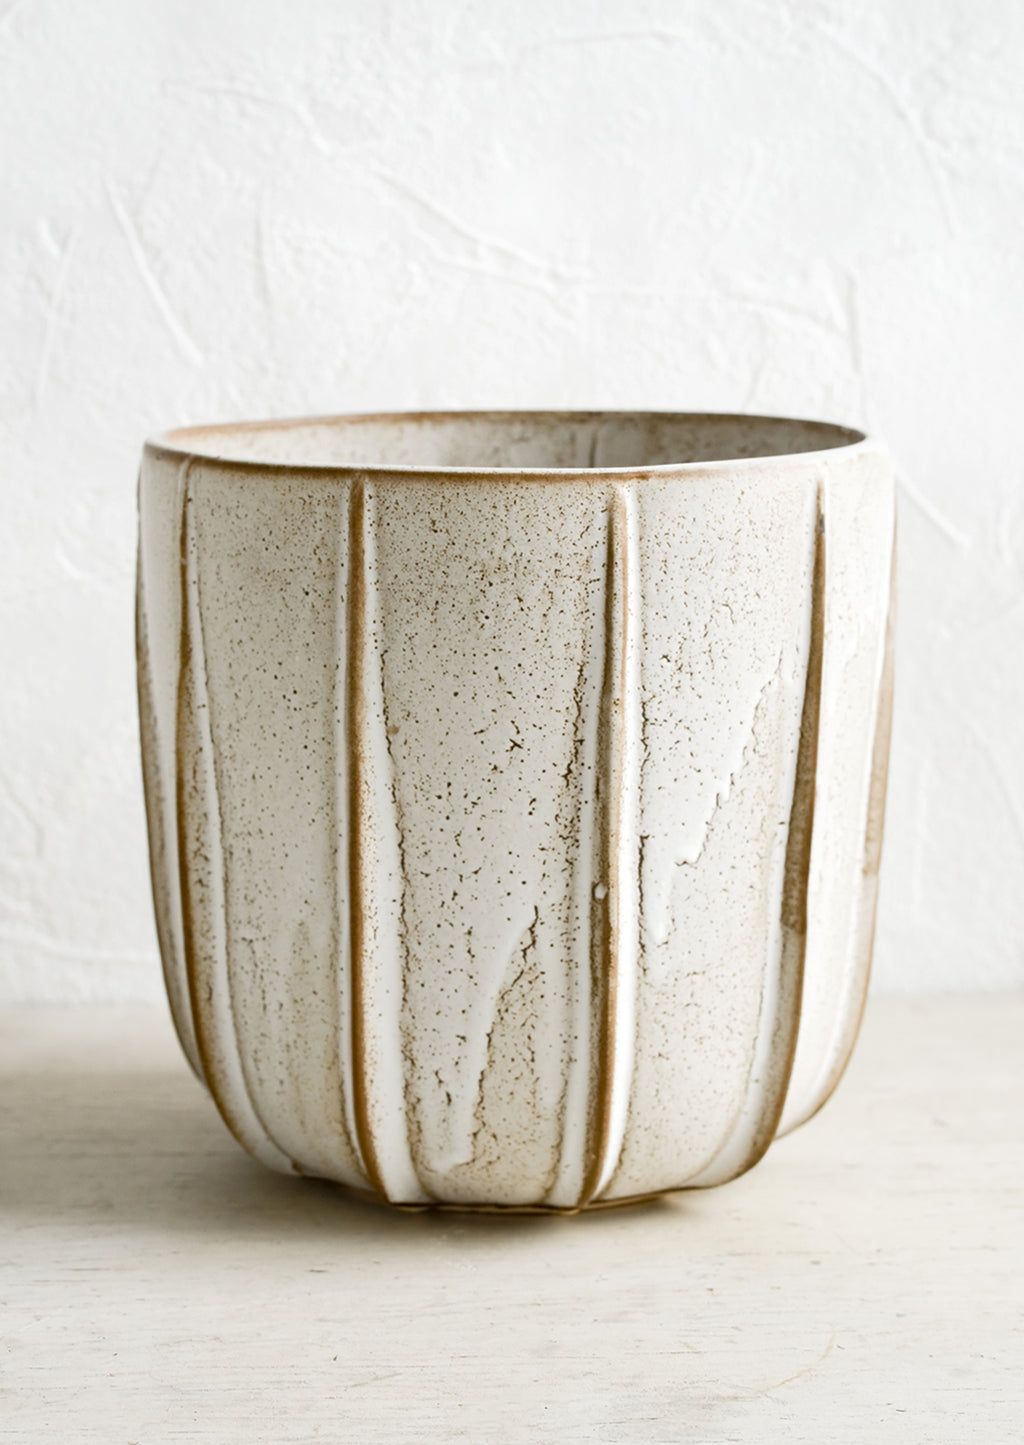 3: A tan ceramic planter with decorative raised grooves.